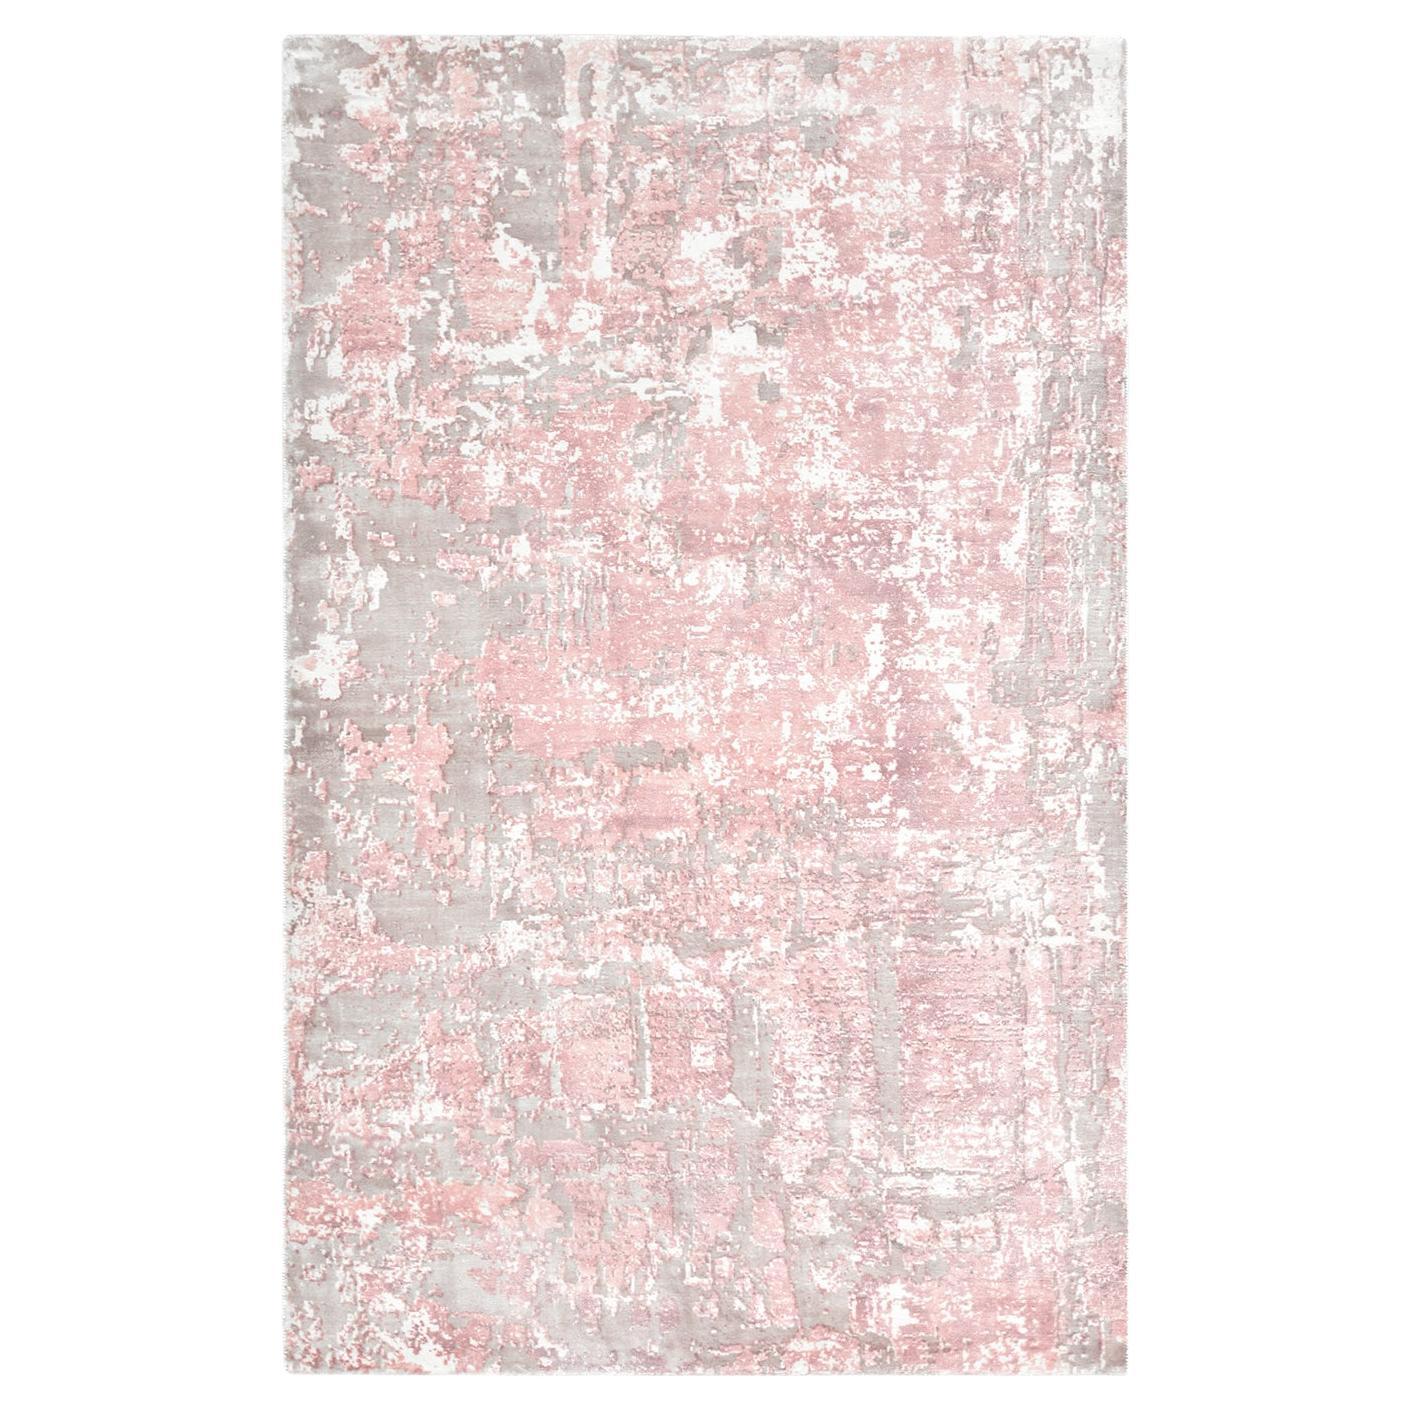 Solo Rugs Abstract Hand Loomed Pink Area Rug